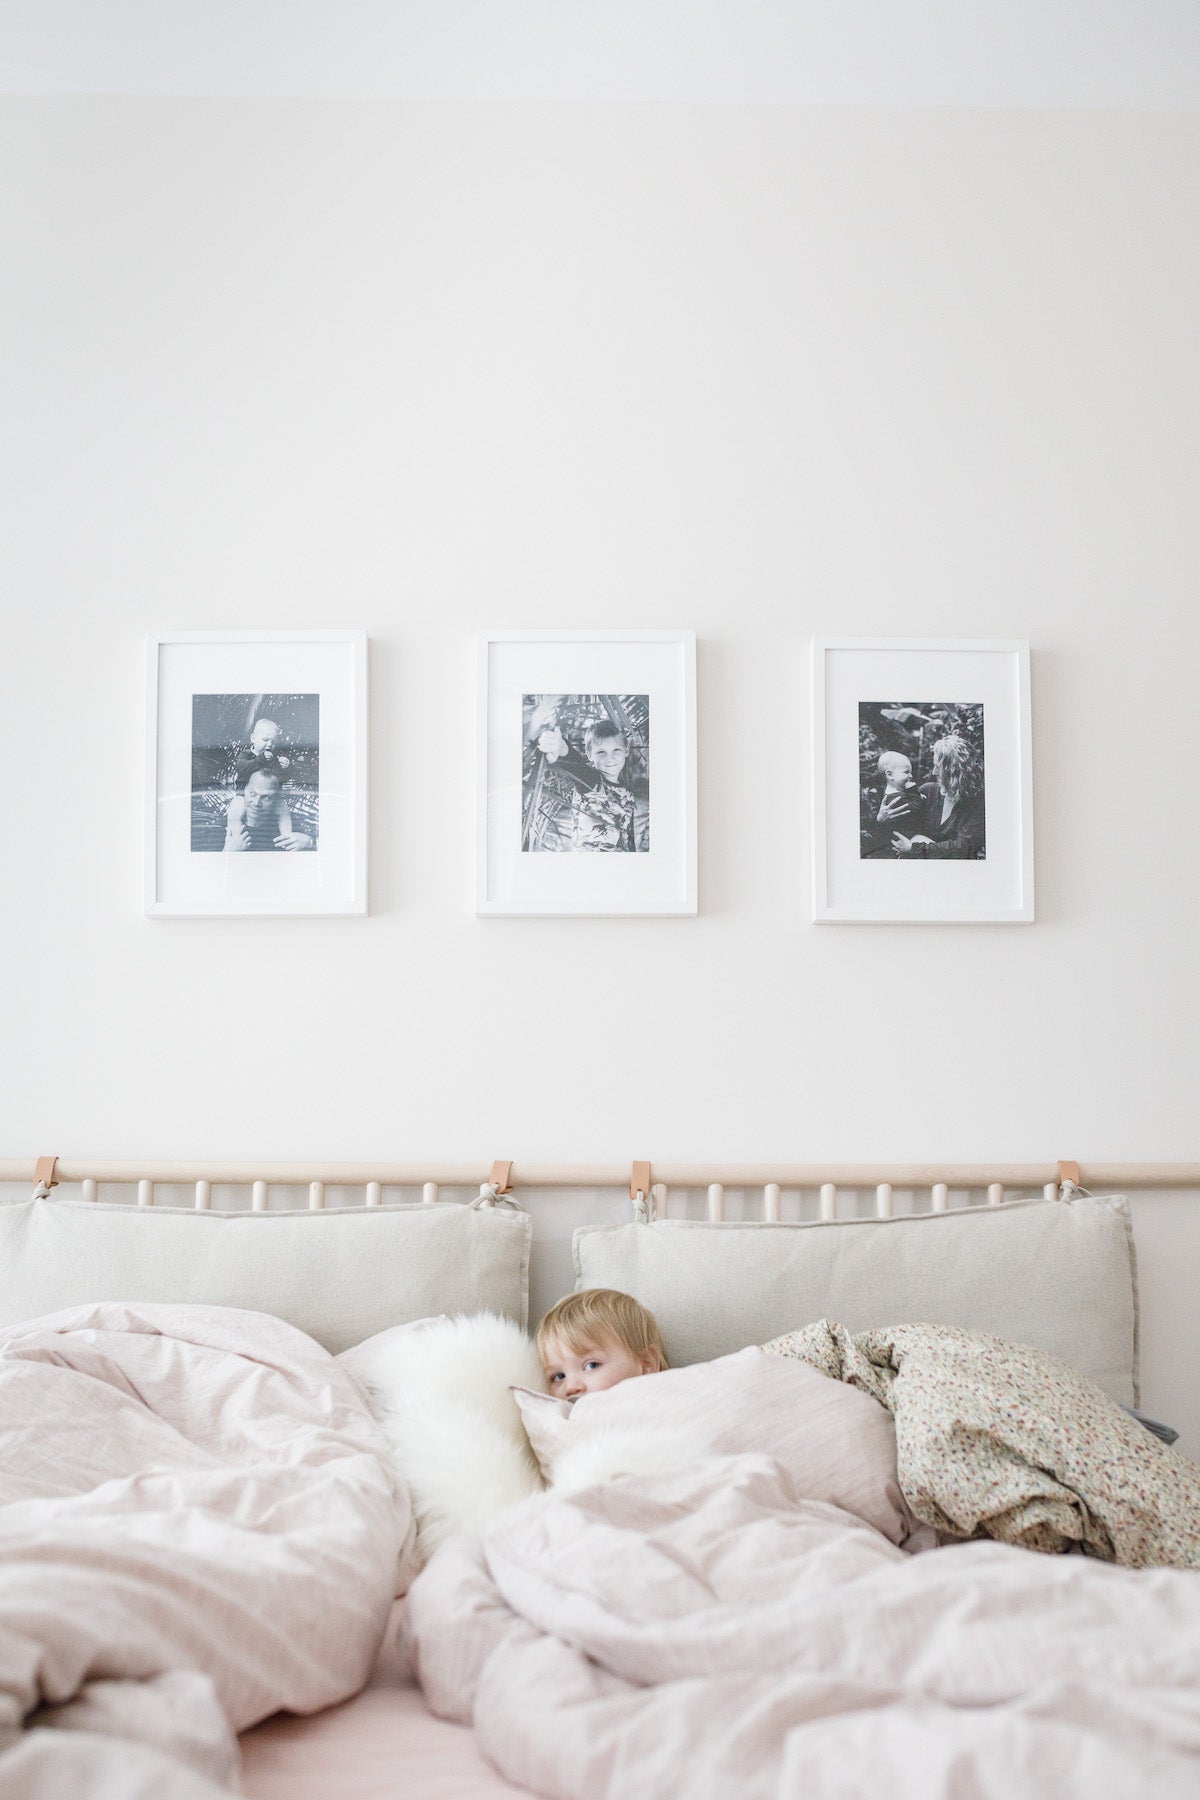 Child curled up under blankets with three Artifact Uprising Gallery Frames filled with family photos overhead.